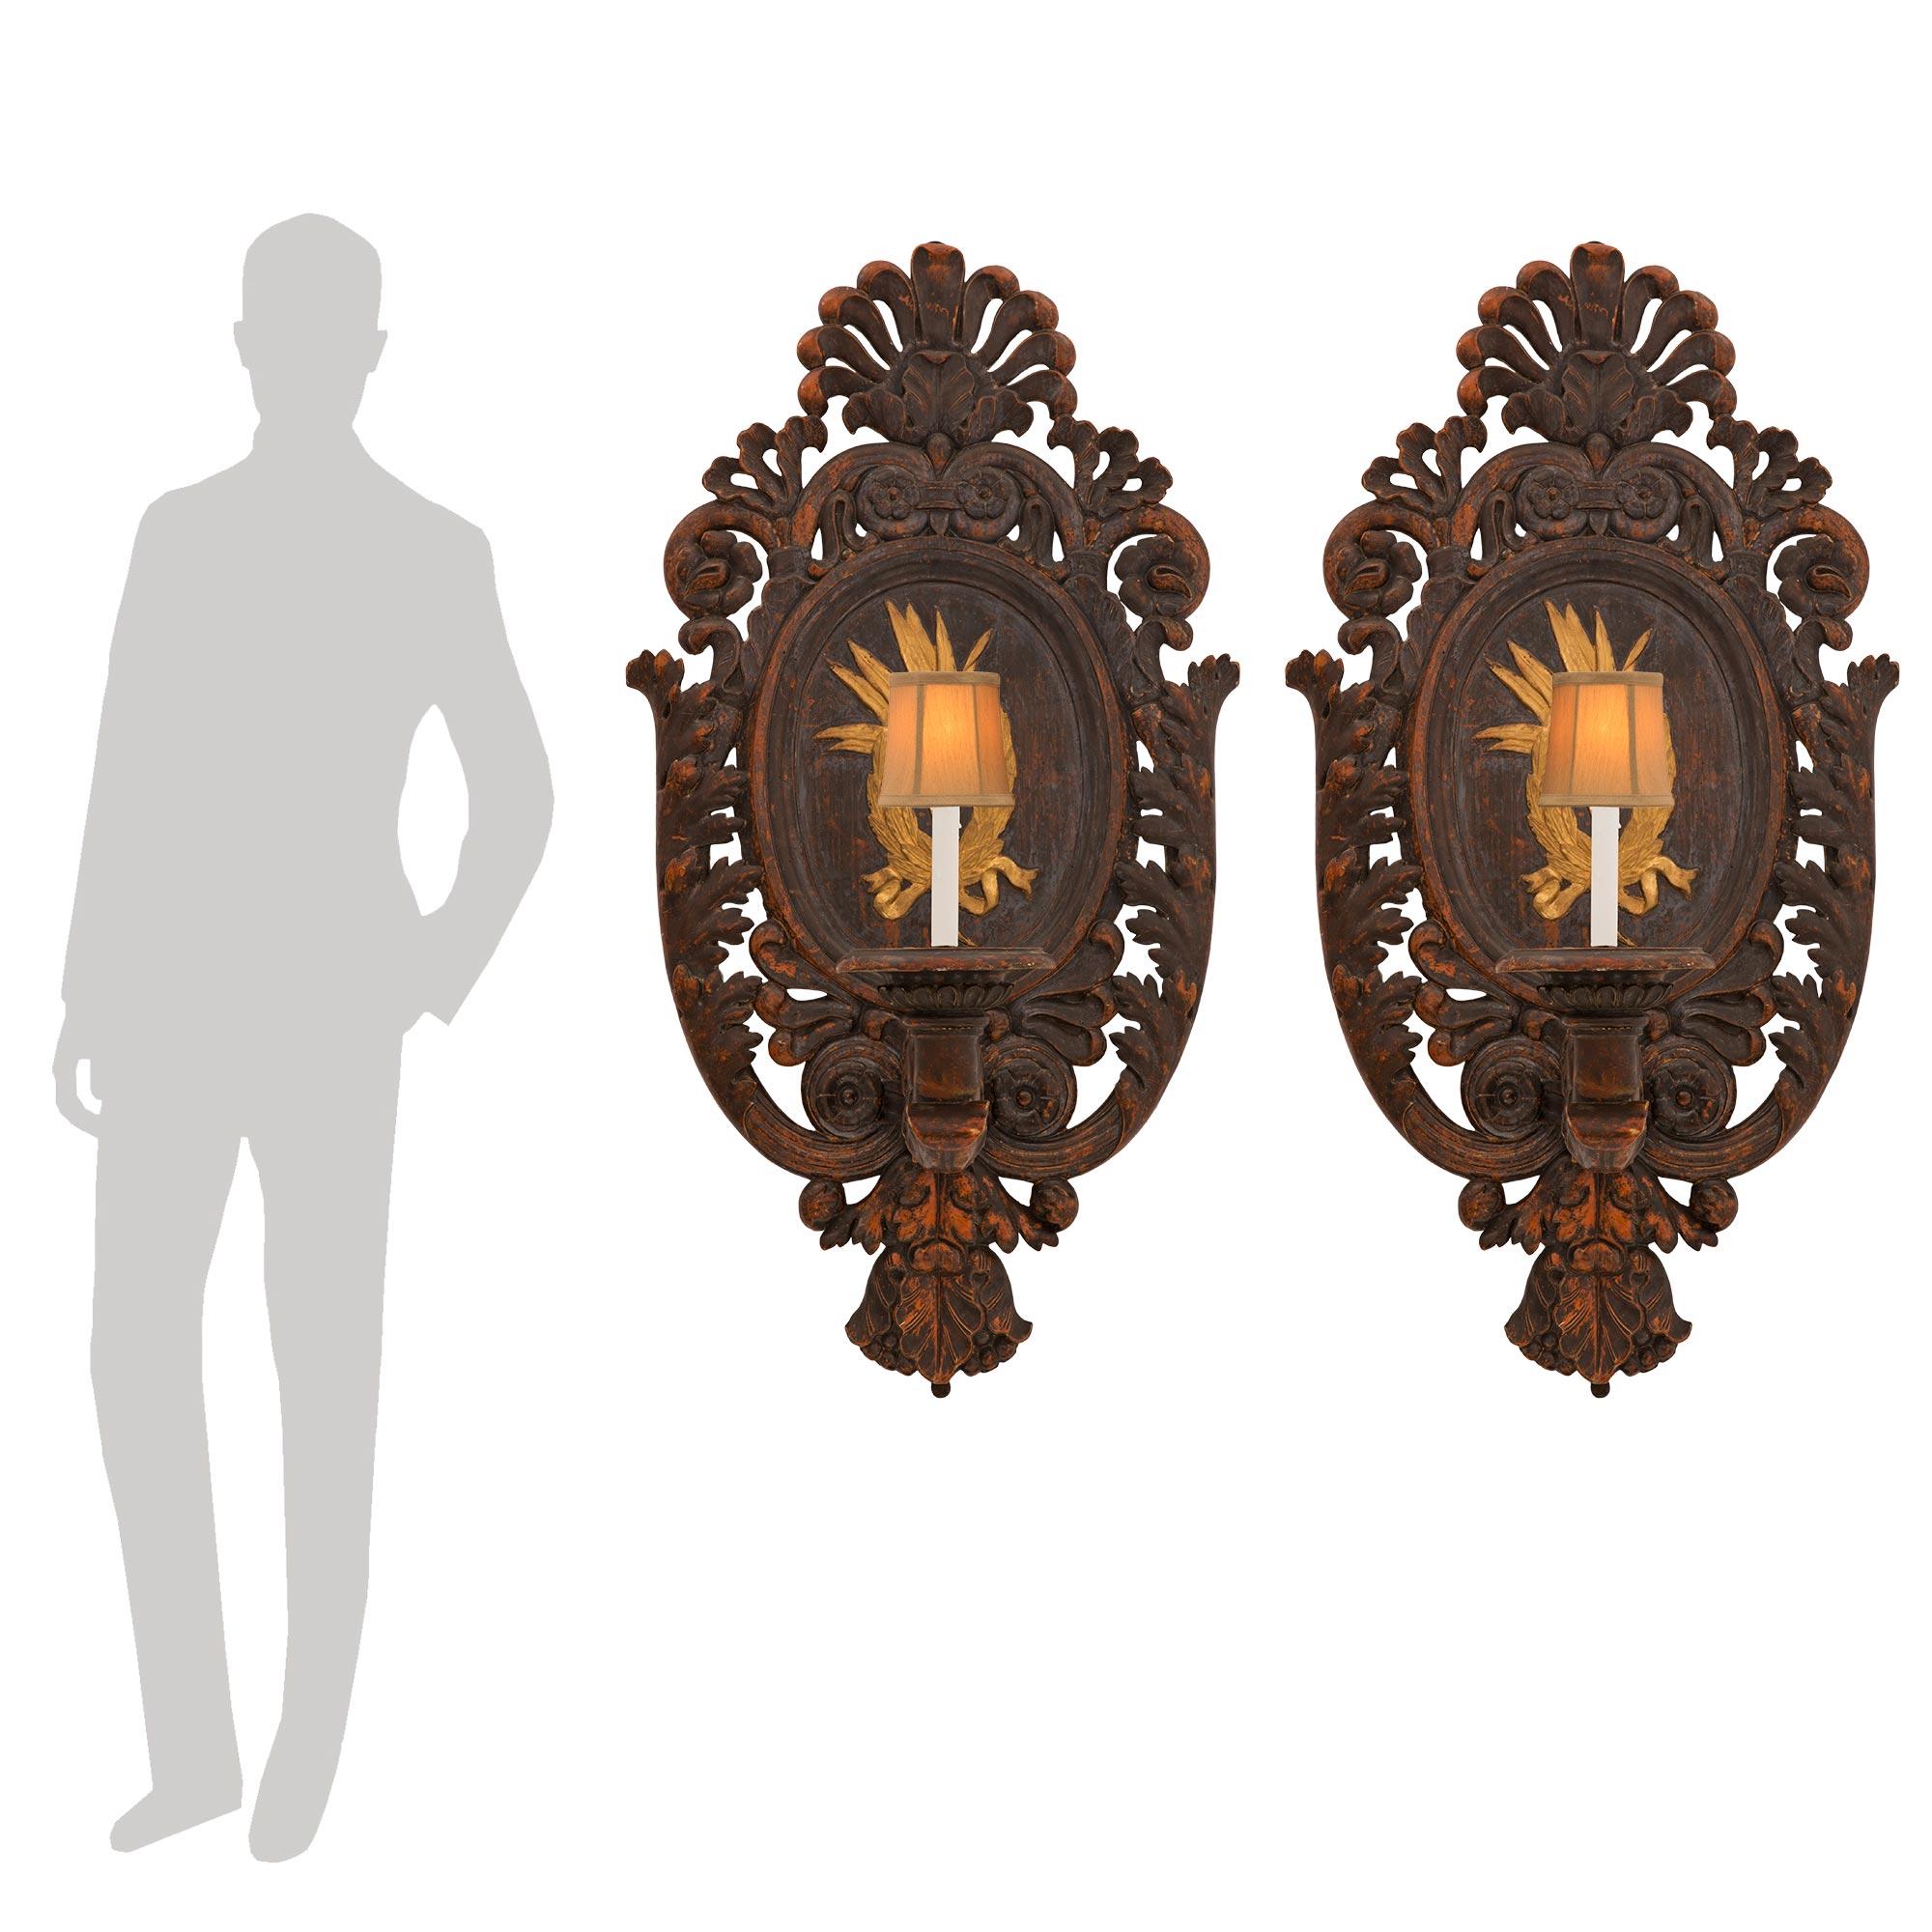 A handsome and monumentally scaled pair of Italian early 19th century Baroque st. polychrome and giltwood sconces. Each impressive sconce is centered by a richly carved pierced bottom foliate design below striking large scrolled foliate movements